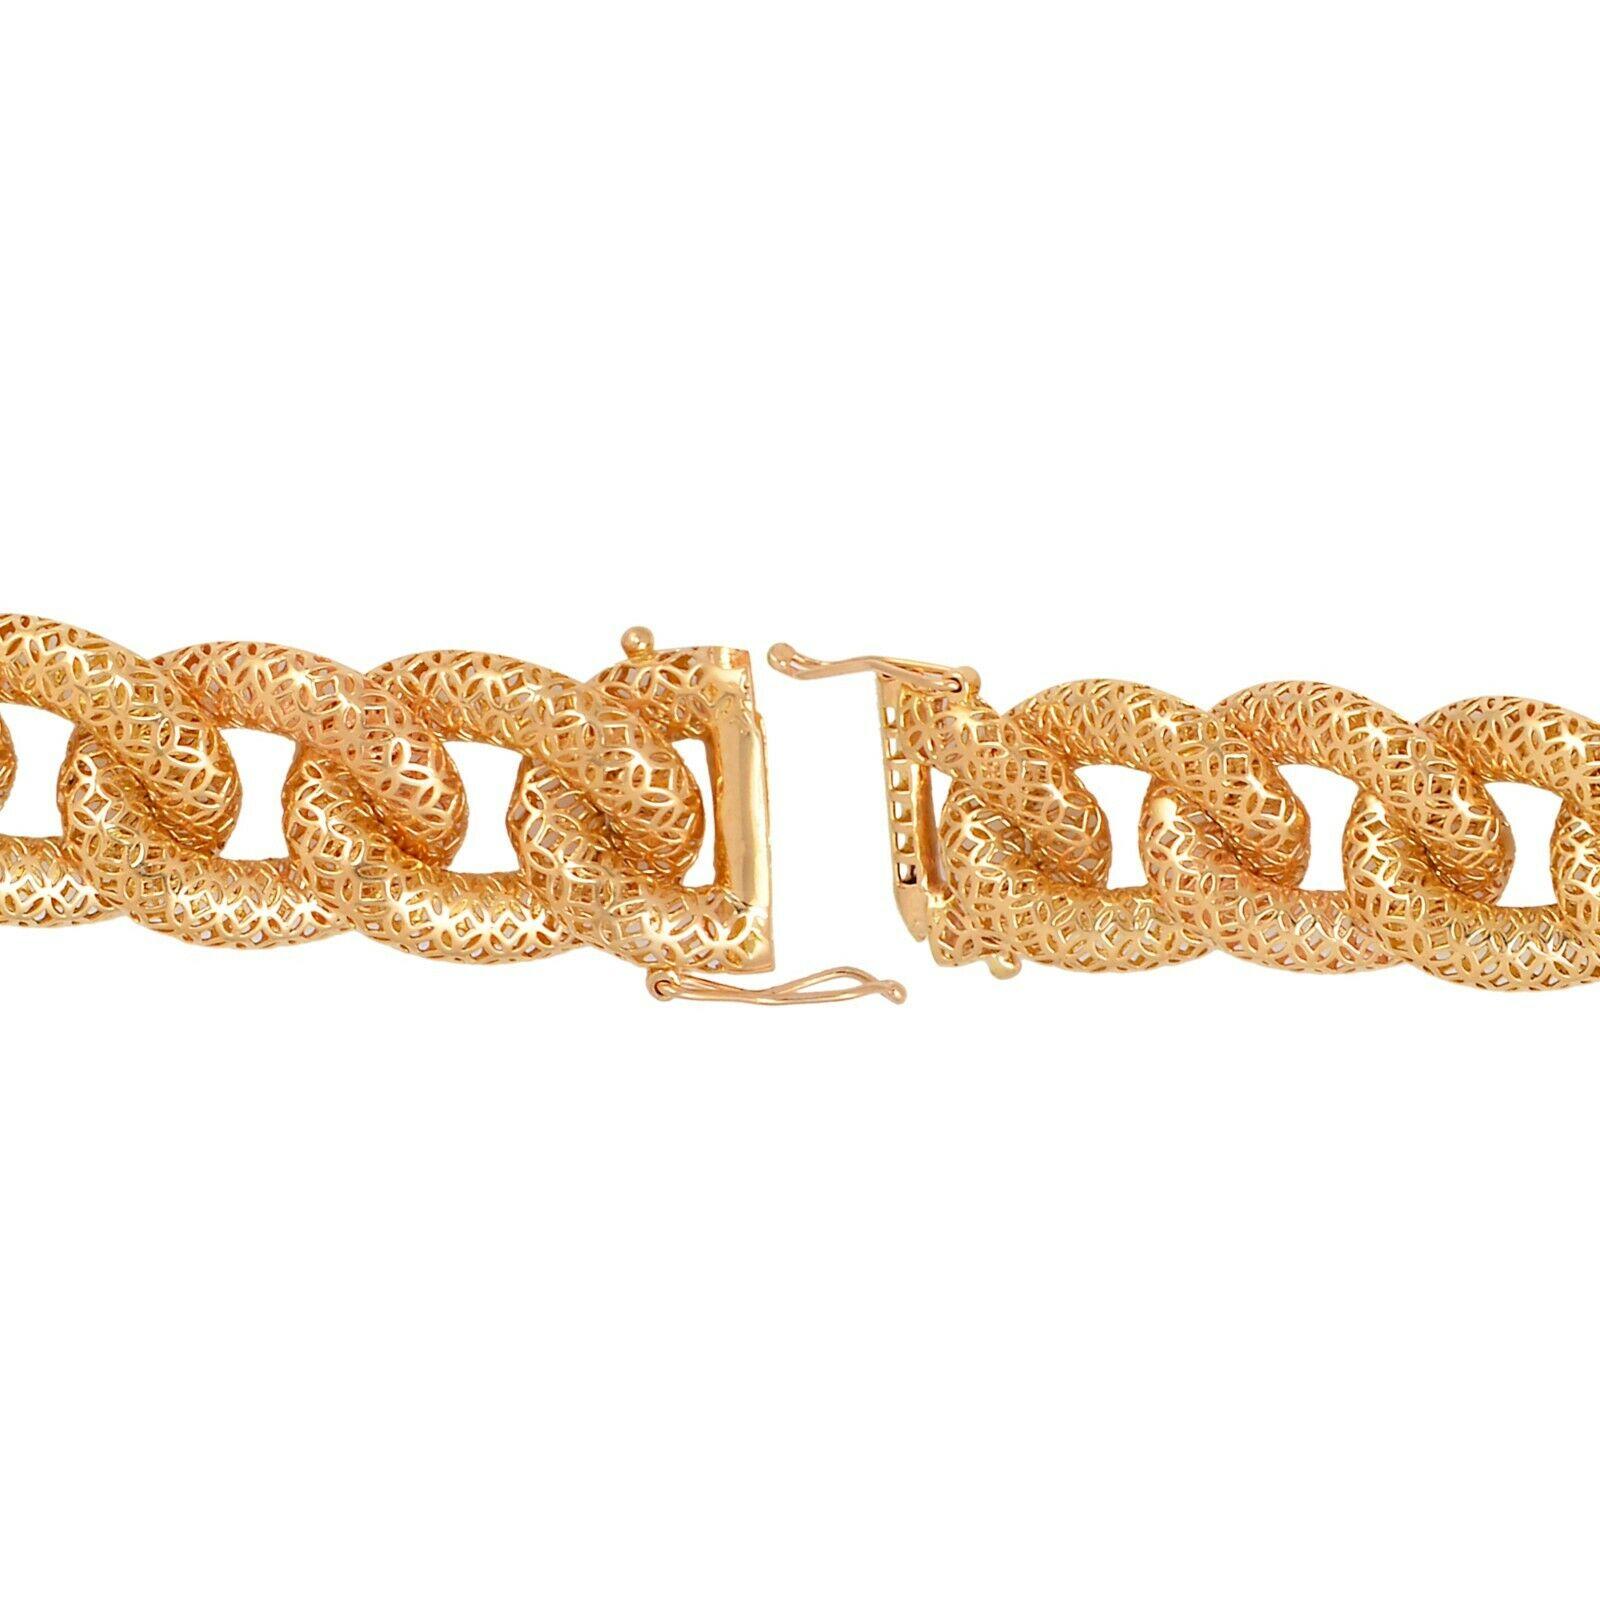 Cast from 18-karat rose gold, this link bracelet is hand set with 2.50 carats of sparkling diamonds. 
Bracelet Size 7 inches.

FOLLOW MEGHNA JEWELS storefront to view the latest collection & exclusive pieces. Meghna Jewels is proudly rated as a Top